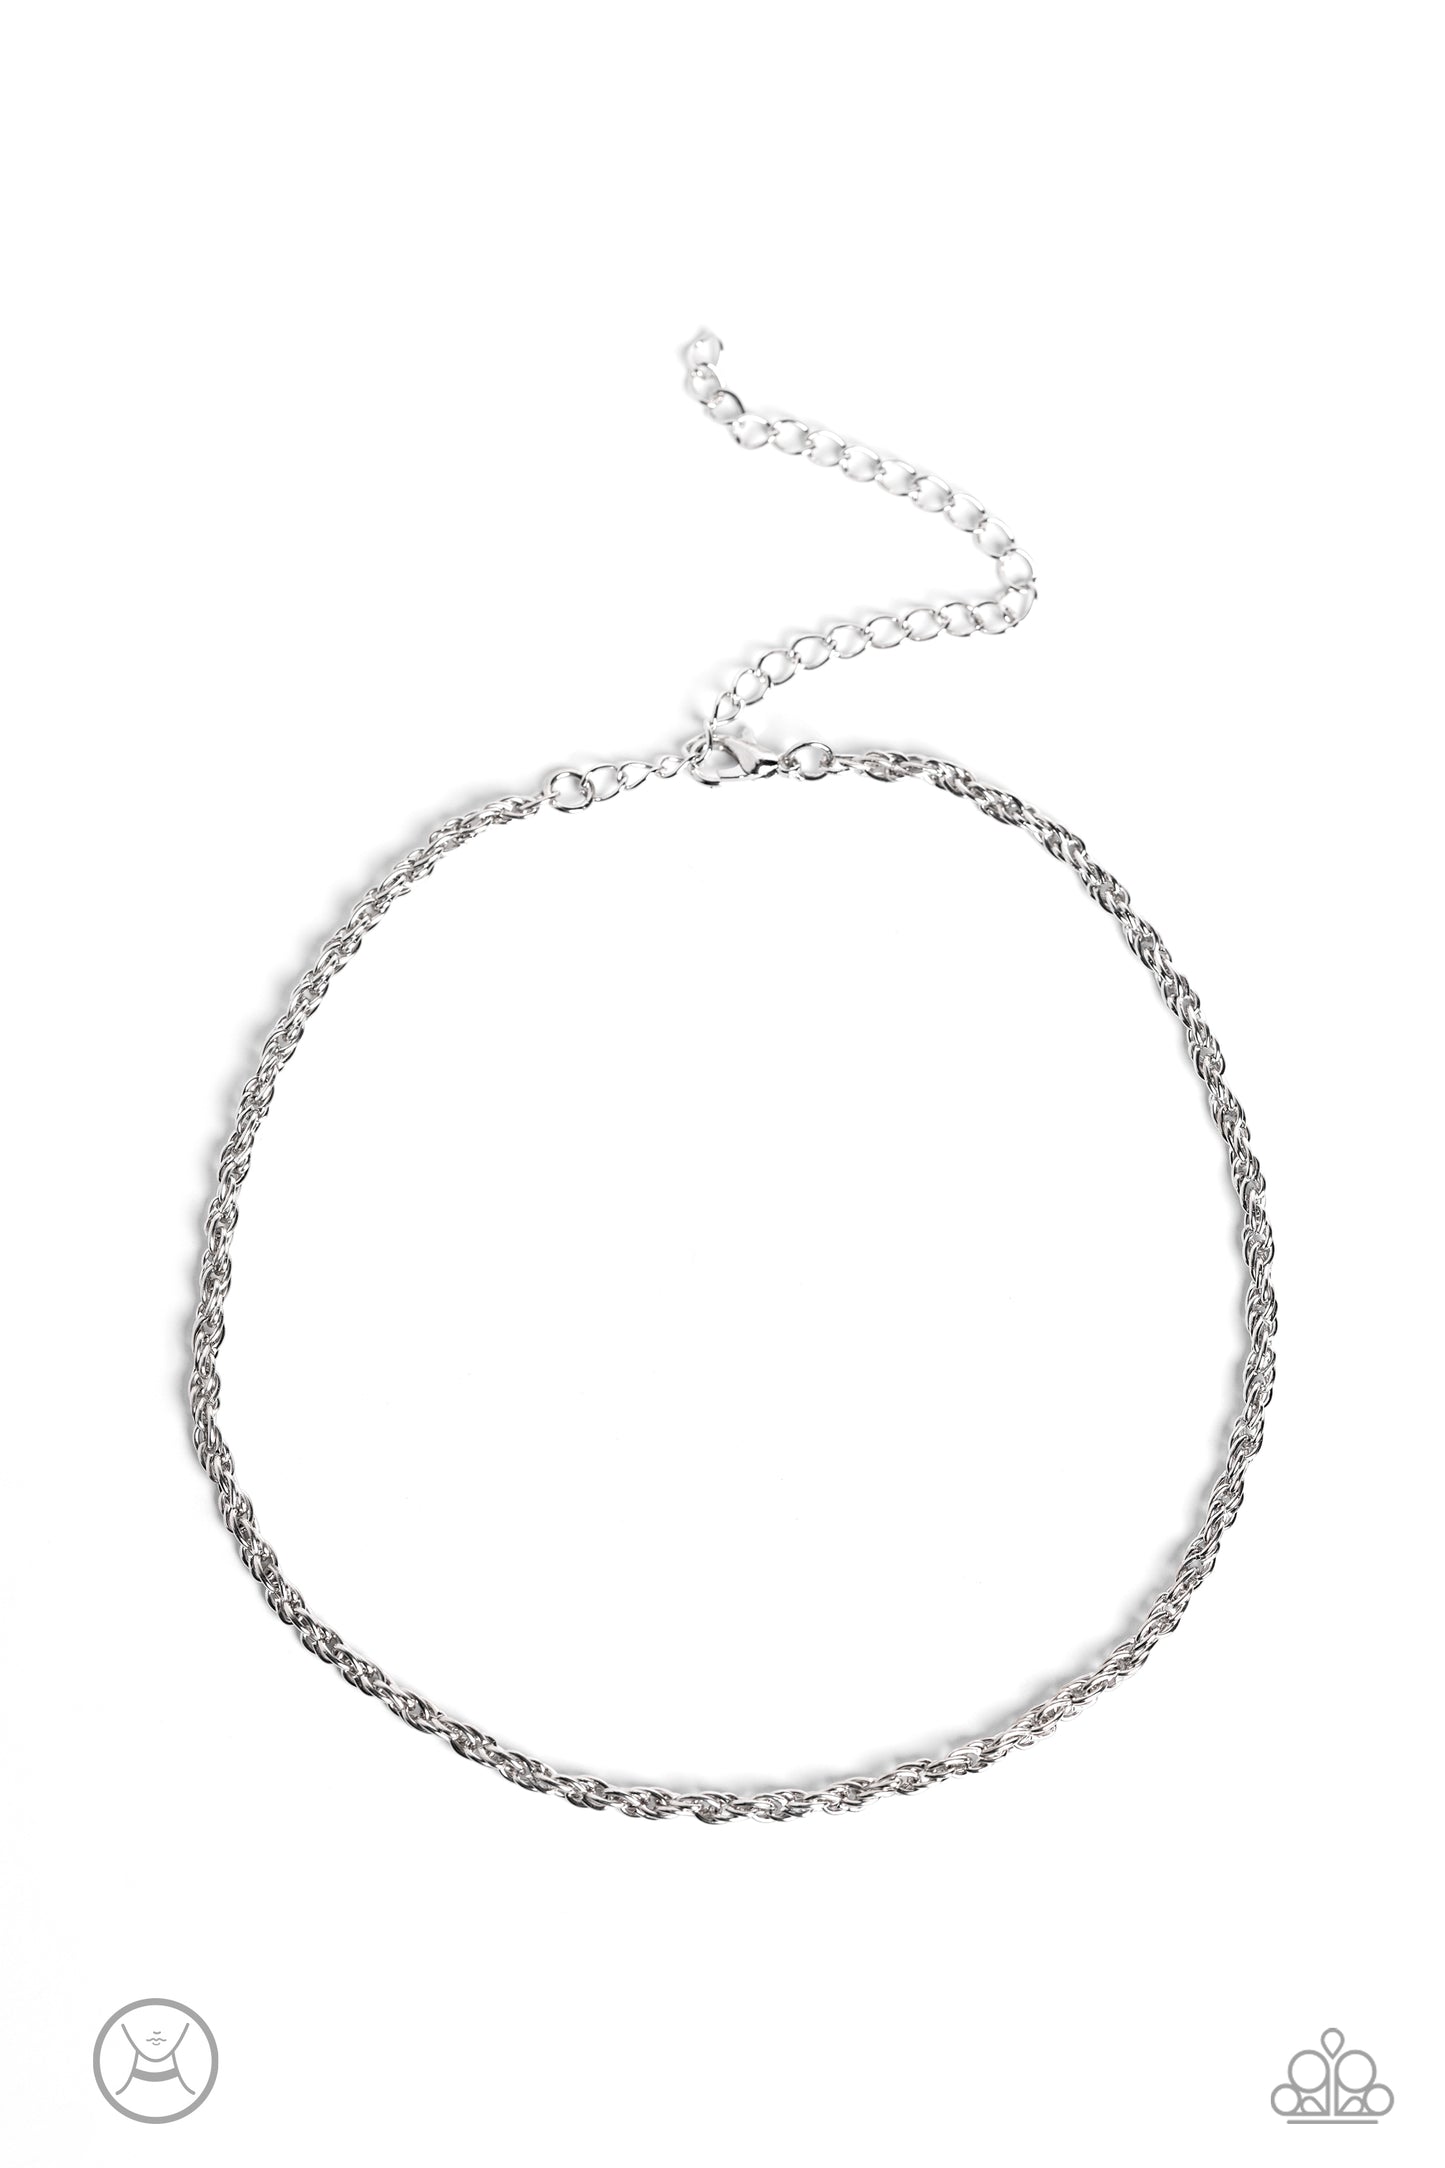 Glimmer of ROPE Silver Choker Necklace - Paparazzi Accessories